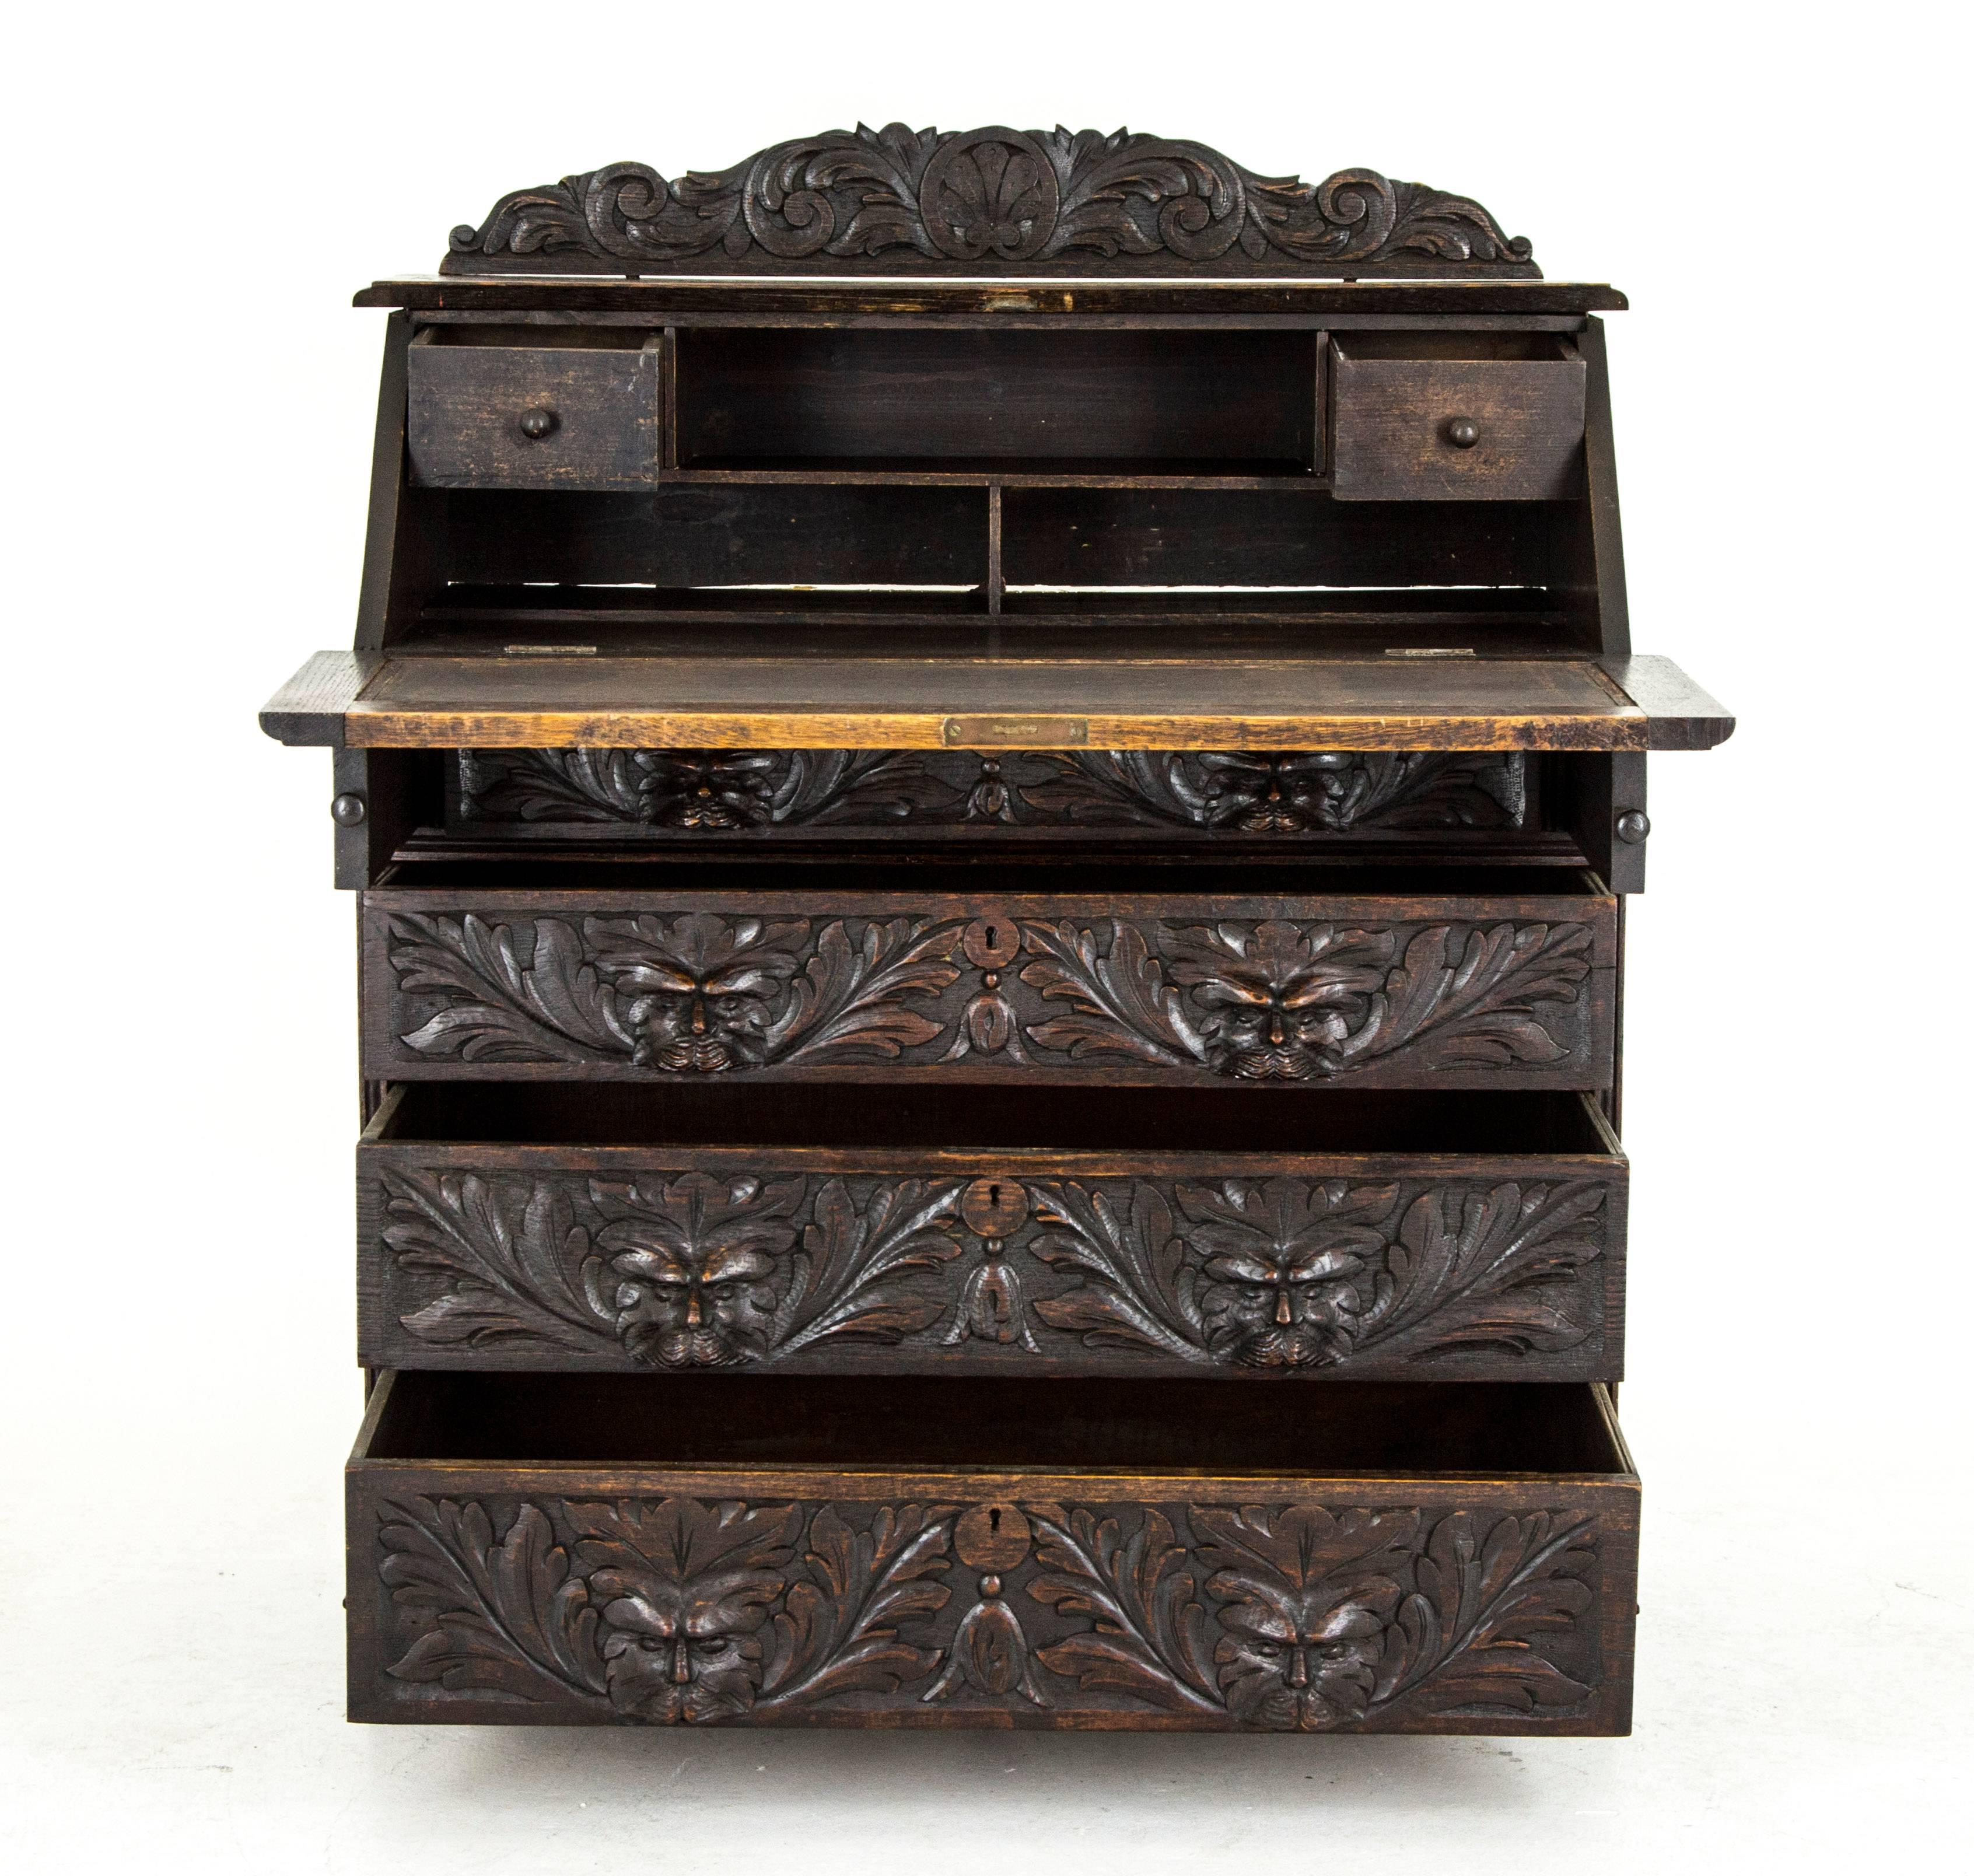 Scotland
1875
Solid oak construction
Original finish
Carved pediment above
Carved fall front lid with pull-out supports
Fitted interior with two drawers below with four dovetailed carved drawers
Carved sides
Ending on a shaped plinth